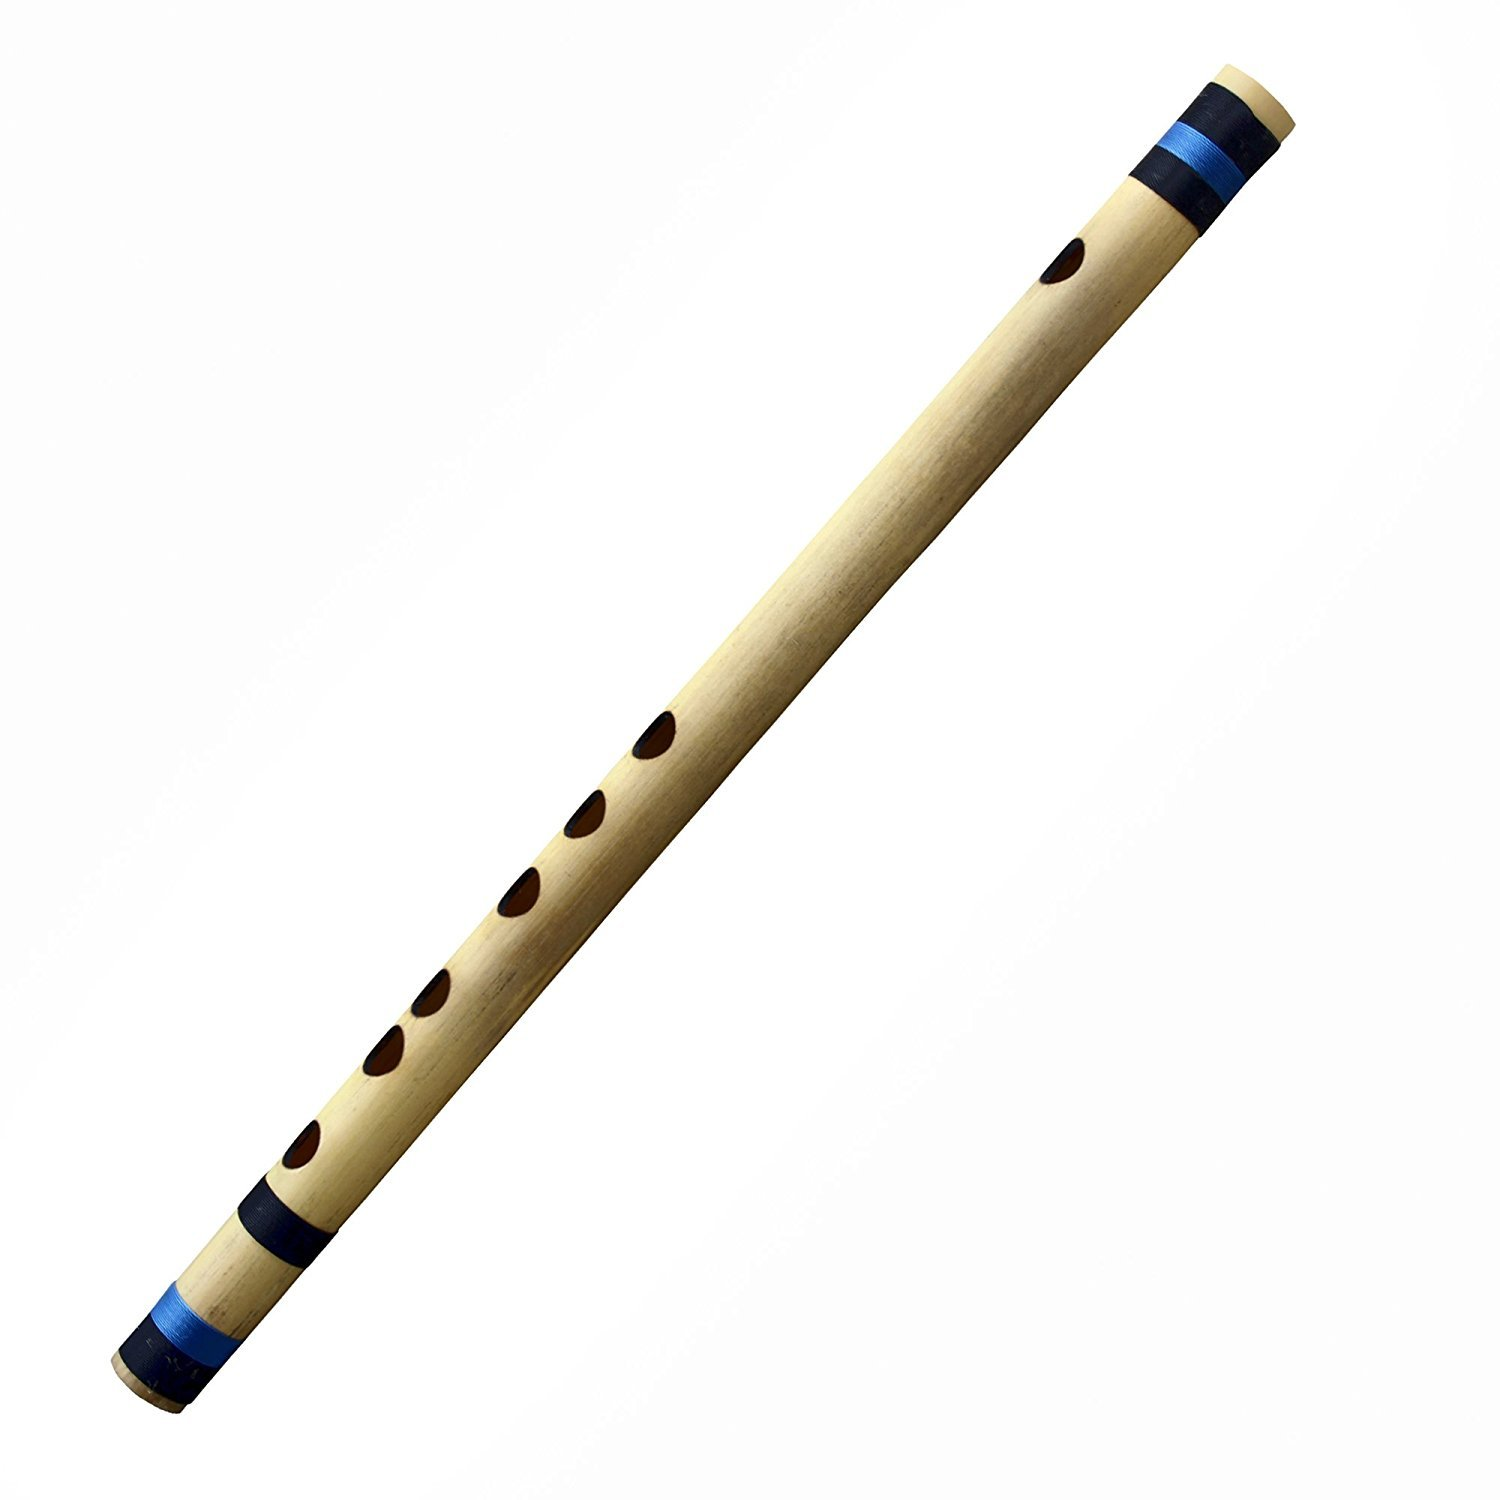 How are traditional Indian bamboo flutes made?